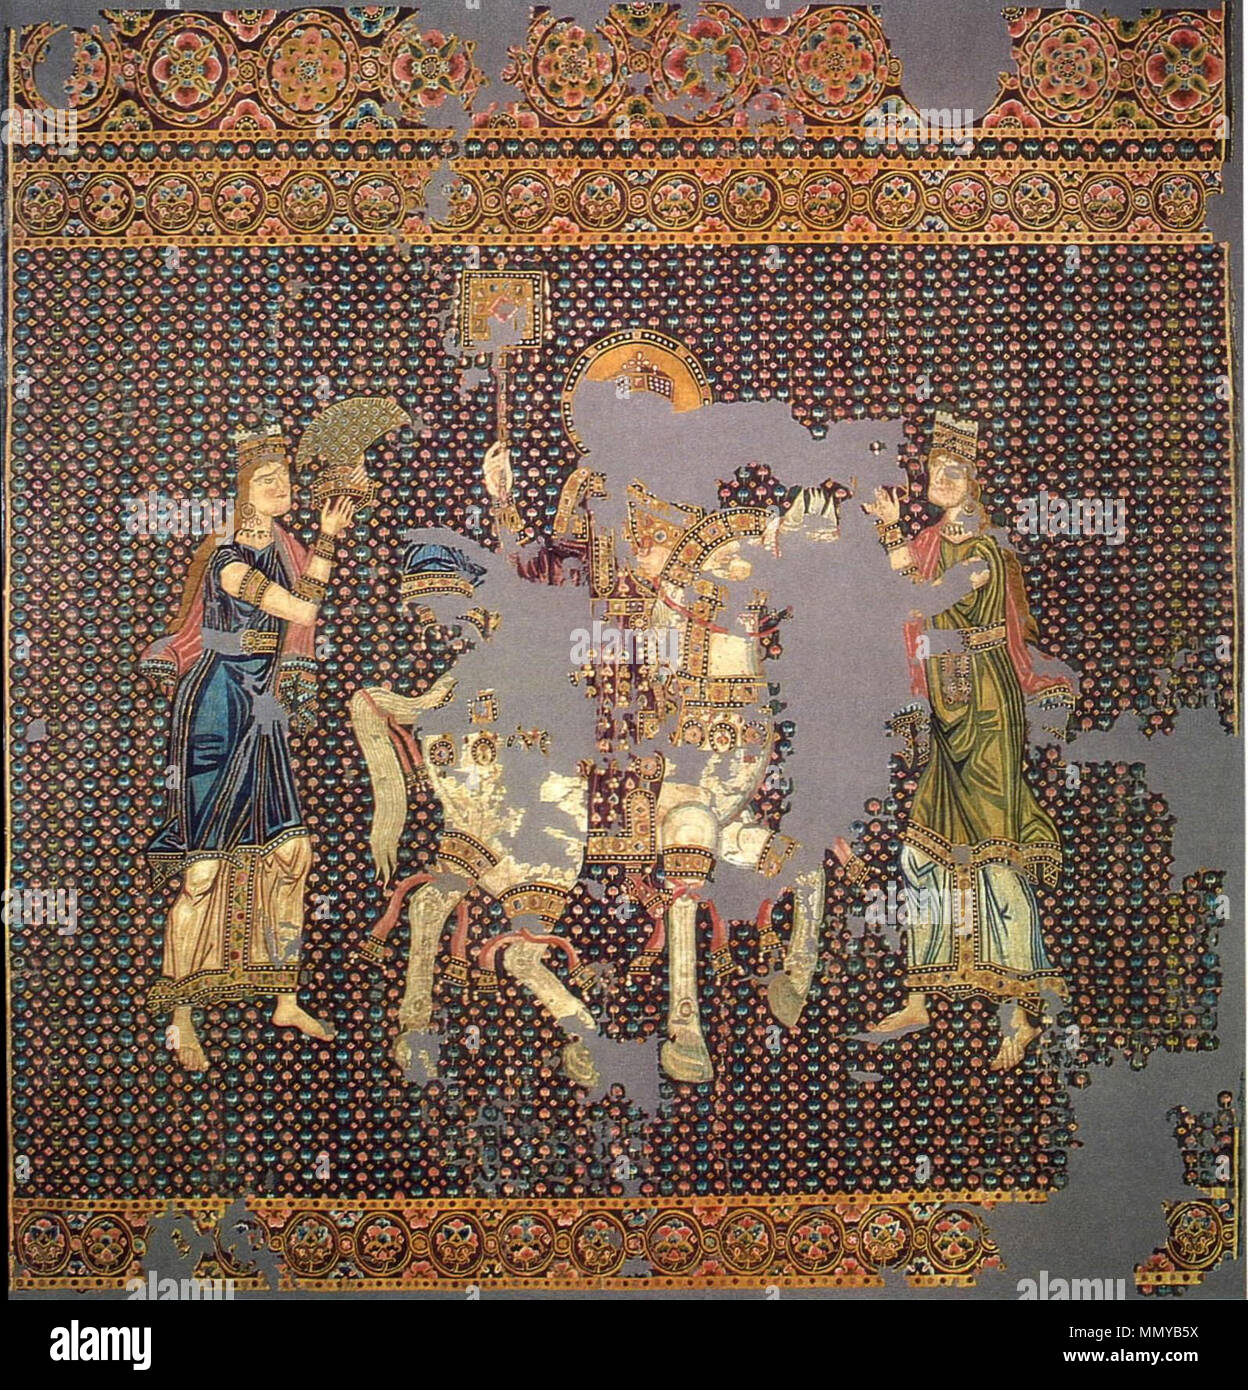 . English: The so-called 'Bamberger Gunthertuch', a Byzantine silk tapestry depicting a Byzantine emperor on his triumphant return from a campaign. He is crowned, bears the labarum and rides a white horse. Originally identified as Basil II (by A. Grabar), it is now accepted that he represents John I Tzimiskes on his return from the campaign against the Rus' in Bulgaria. He is flanked by two female tychae, who personify Constantinople's two demoi, the Blues and the Greens. The one on the right offers [possibly] a crown, and the one on the left a triumphal toupha headdress. The silk was acquired Stock Photo